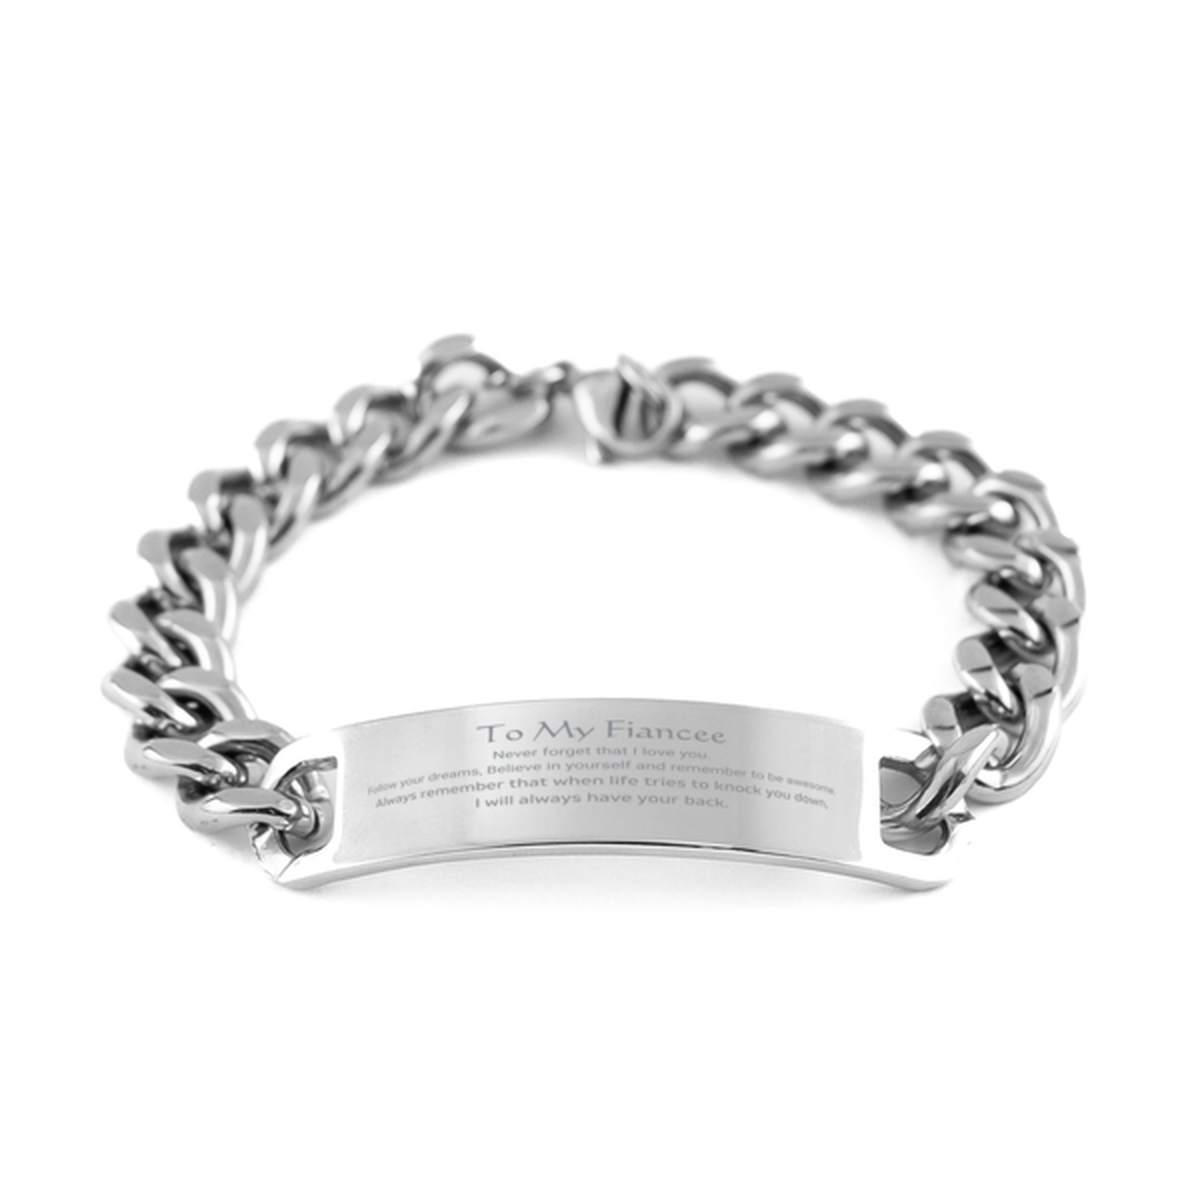 Inspirational Gifts for Fiancee, Follow your dreams, Believe in yourself, Fiancee Cuban Chain Stainless Steel Bracelet, Birthday Christmas Unique Gifts For Fiancee